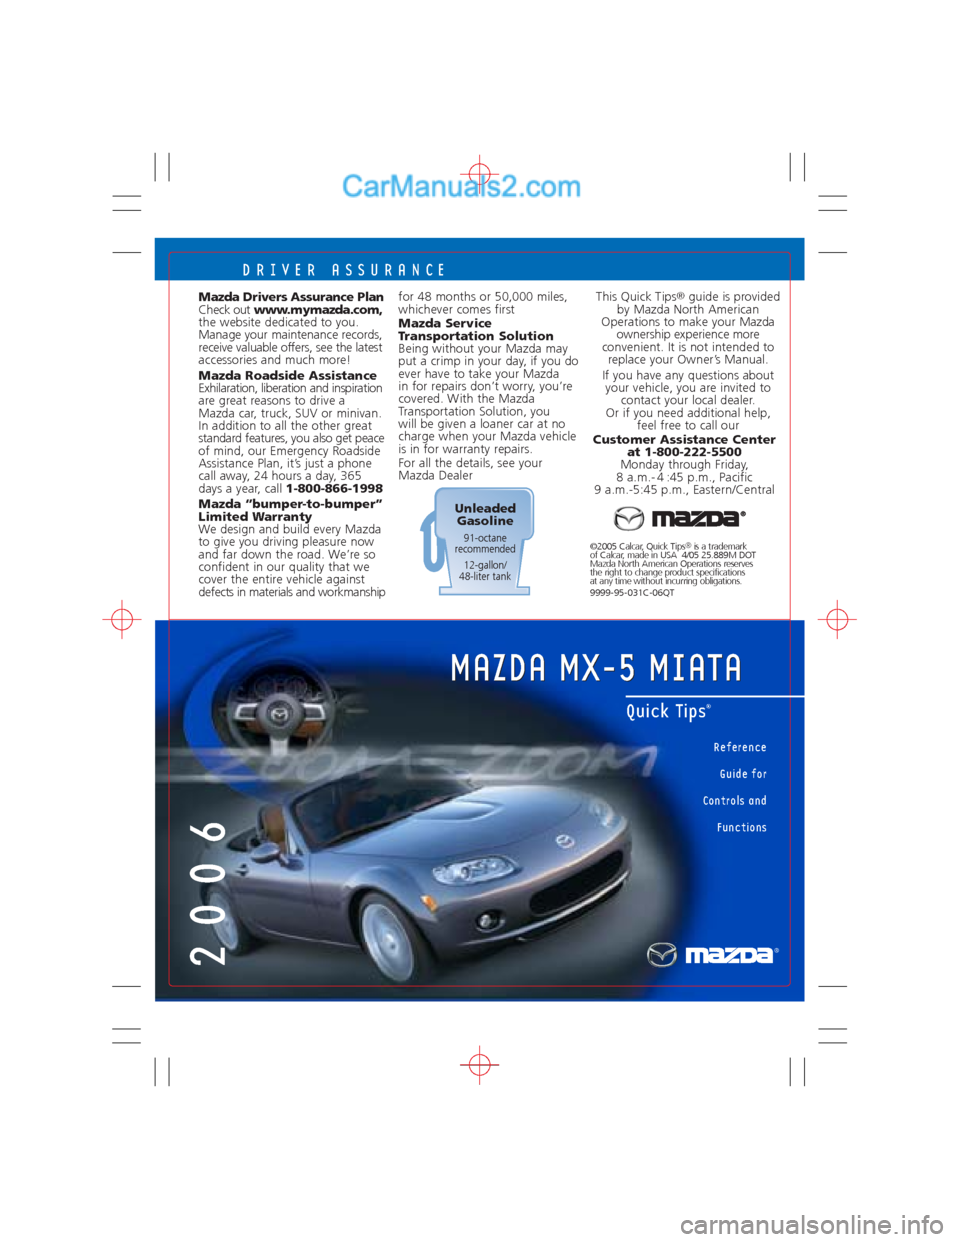 MAZDA MODEL MX-5 2006  Quick Tips (in English) DRIVER ASSURANCE
for 48 months or 50,000 miles,
whichever comes first
Mazda Service
Transportation Solution
Being without your Mazda may
put a crimp in your day, if you do
ever have to take your Mazda